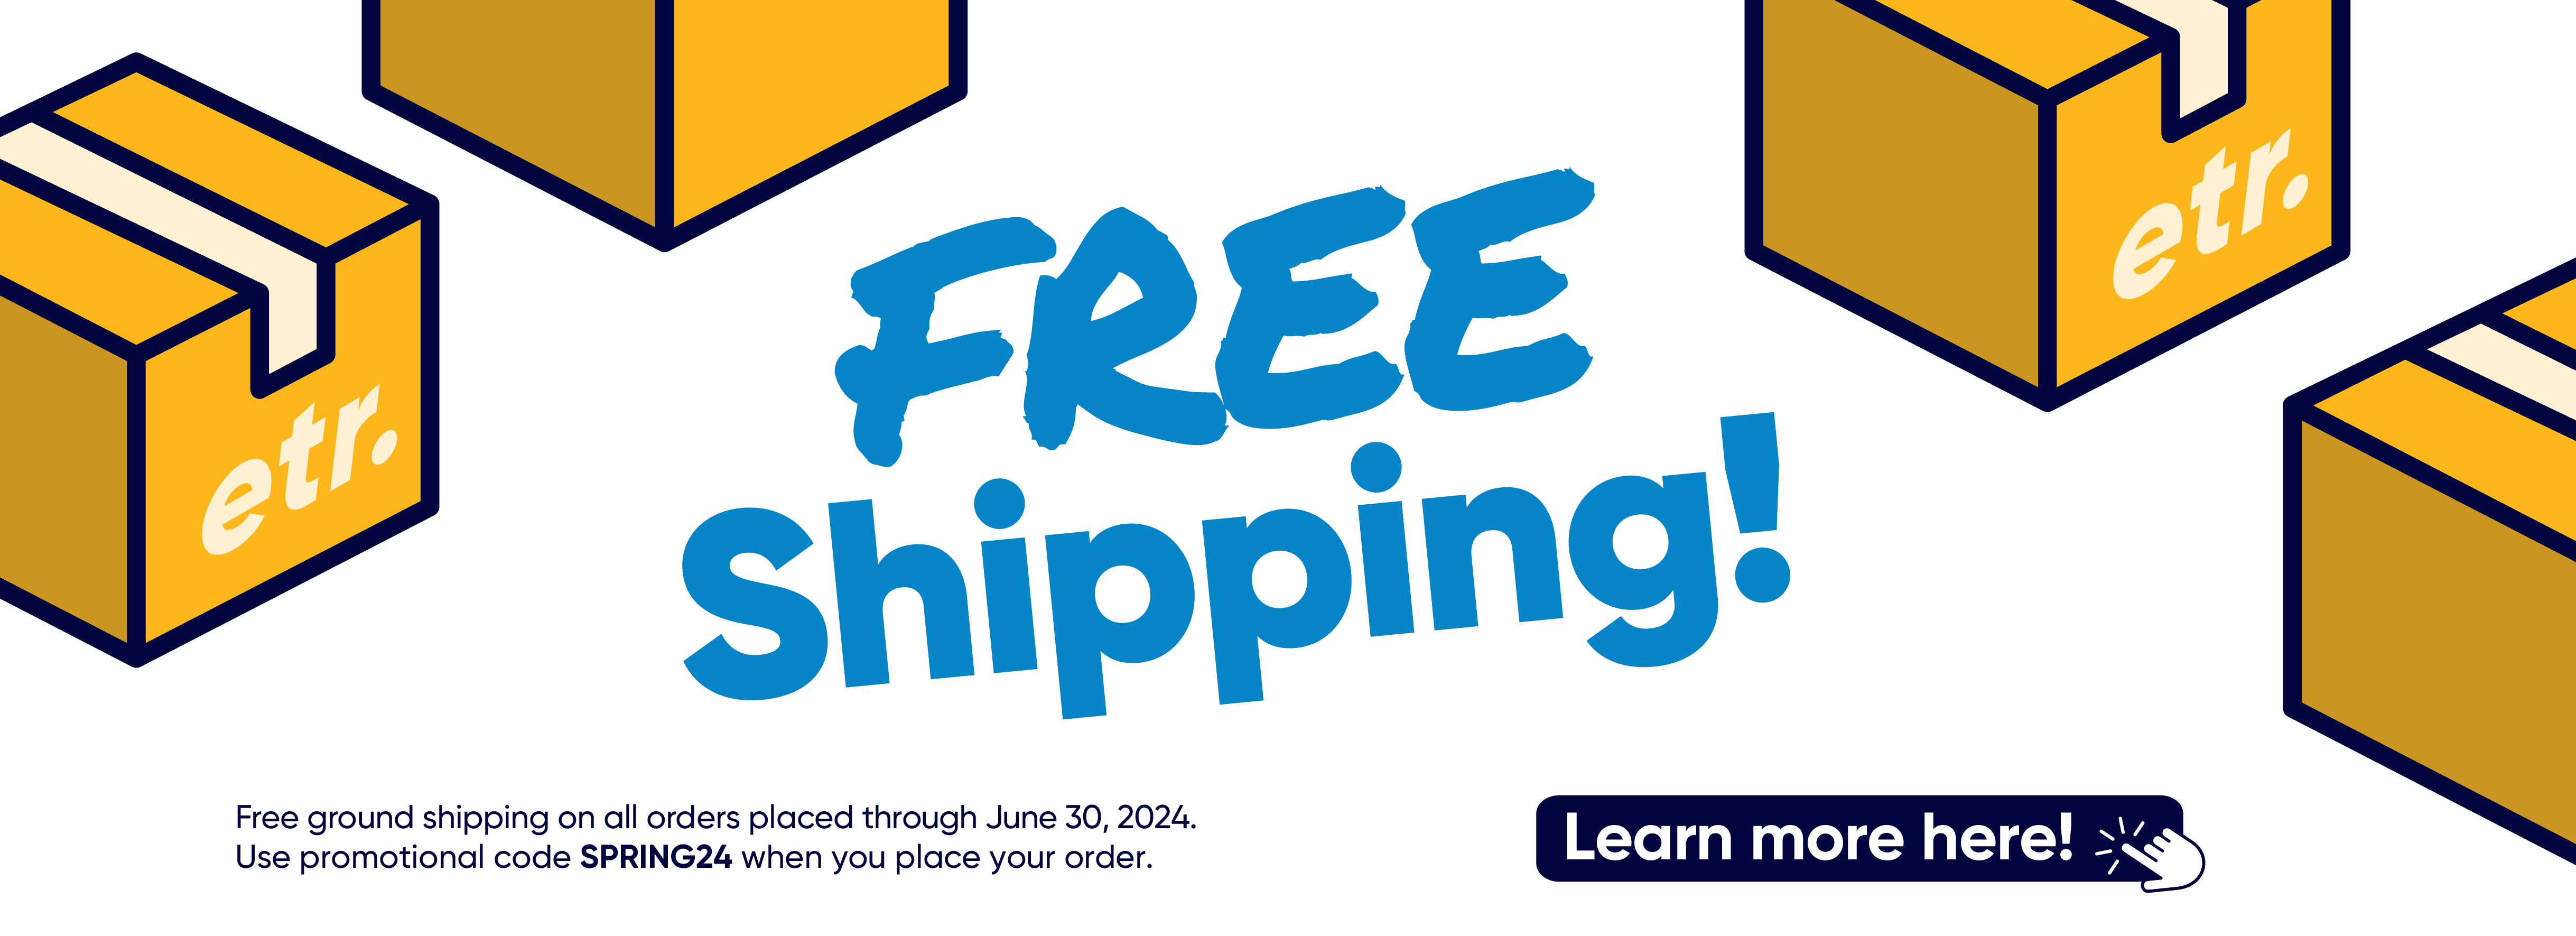 The words 'Free Shipping!' surrounded by cardboard boxes with 'etr.' printed on their sides. The bottom of the banner reads, 'Free ground shipping on all orders placed through June 30, 2024. Use promotional code SPRING24 (all caps, no space) when you place your order. Learn more here!' There is a cursor graphic to indicate you should follow the link.